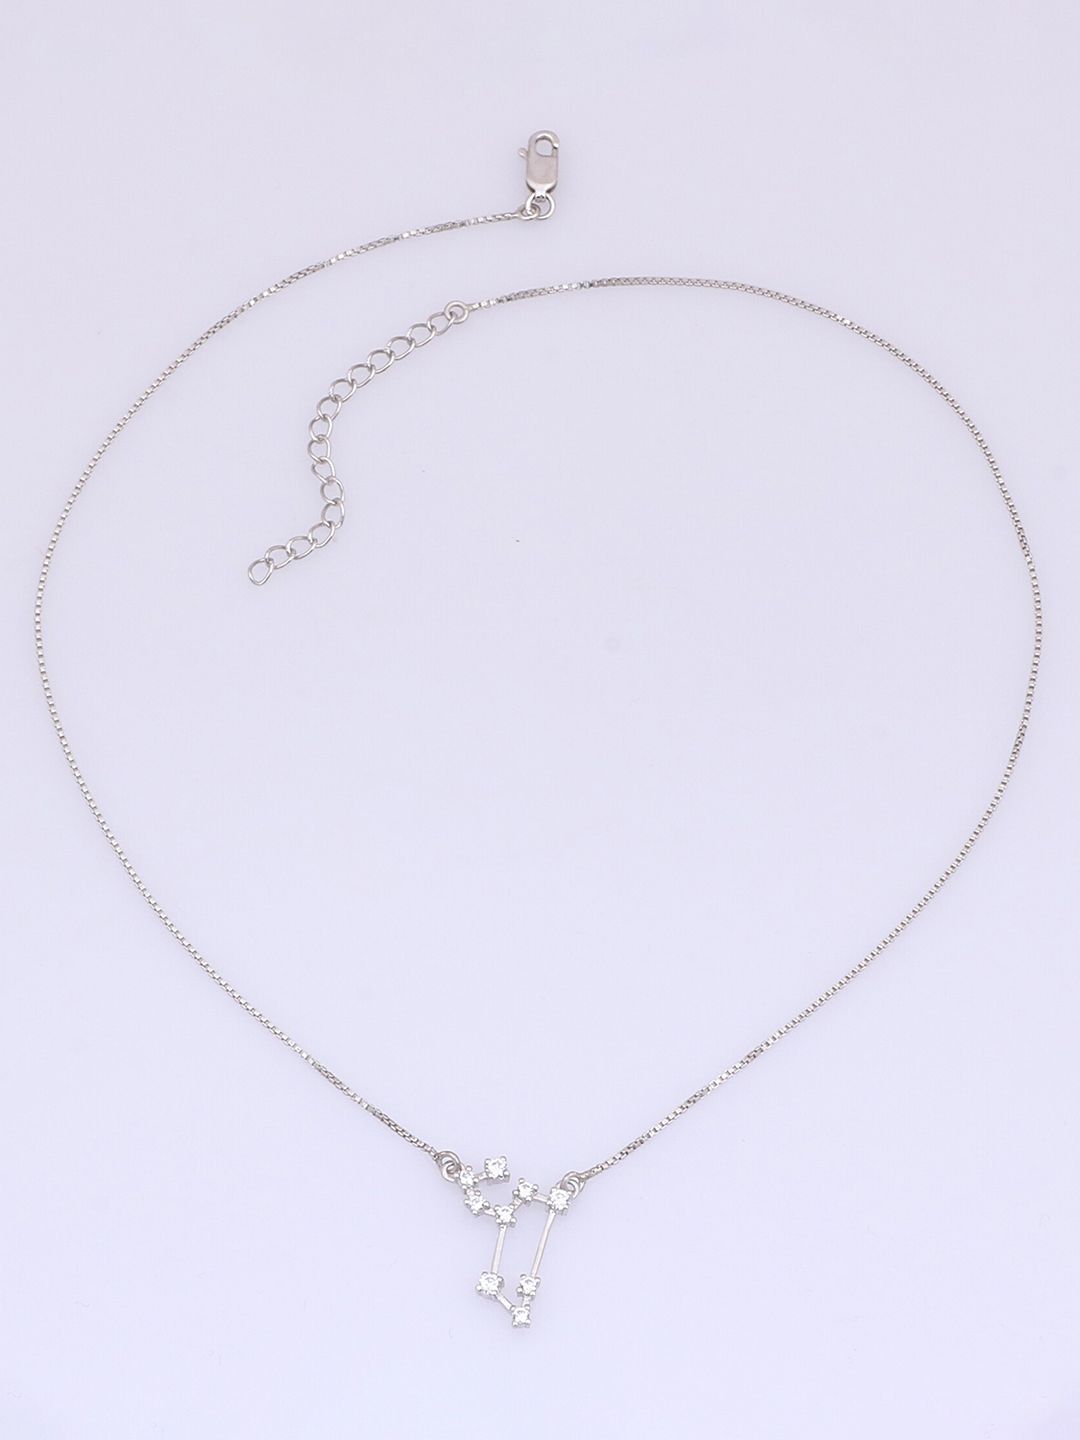 Silgo White Silver Rhodium-Plated Necklace Price in India